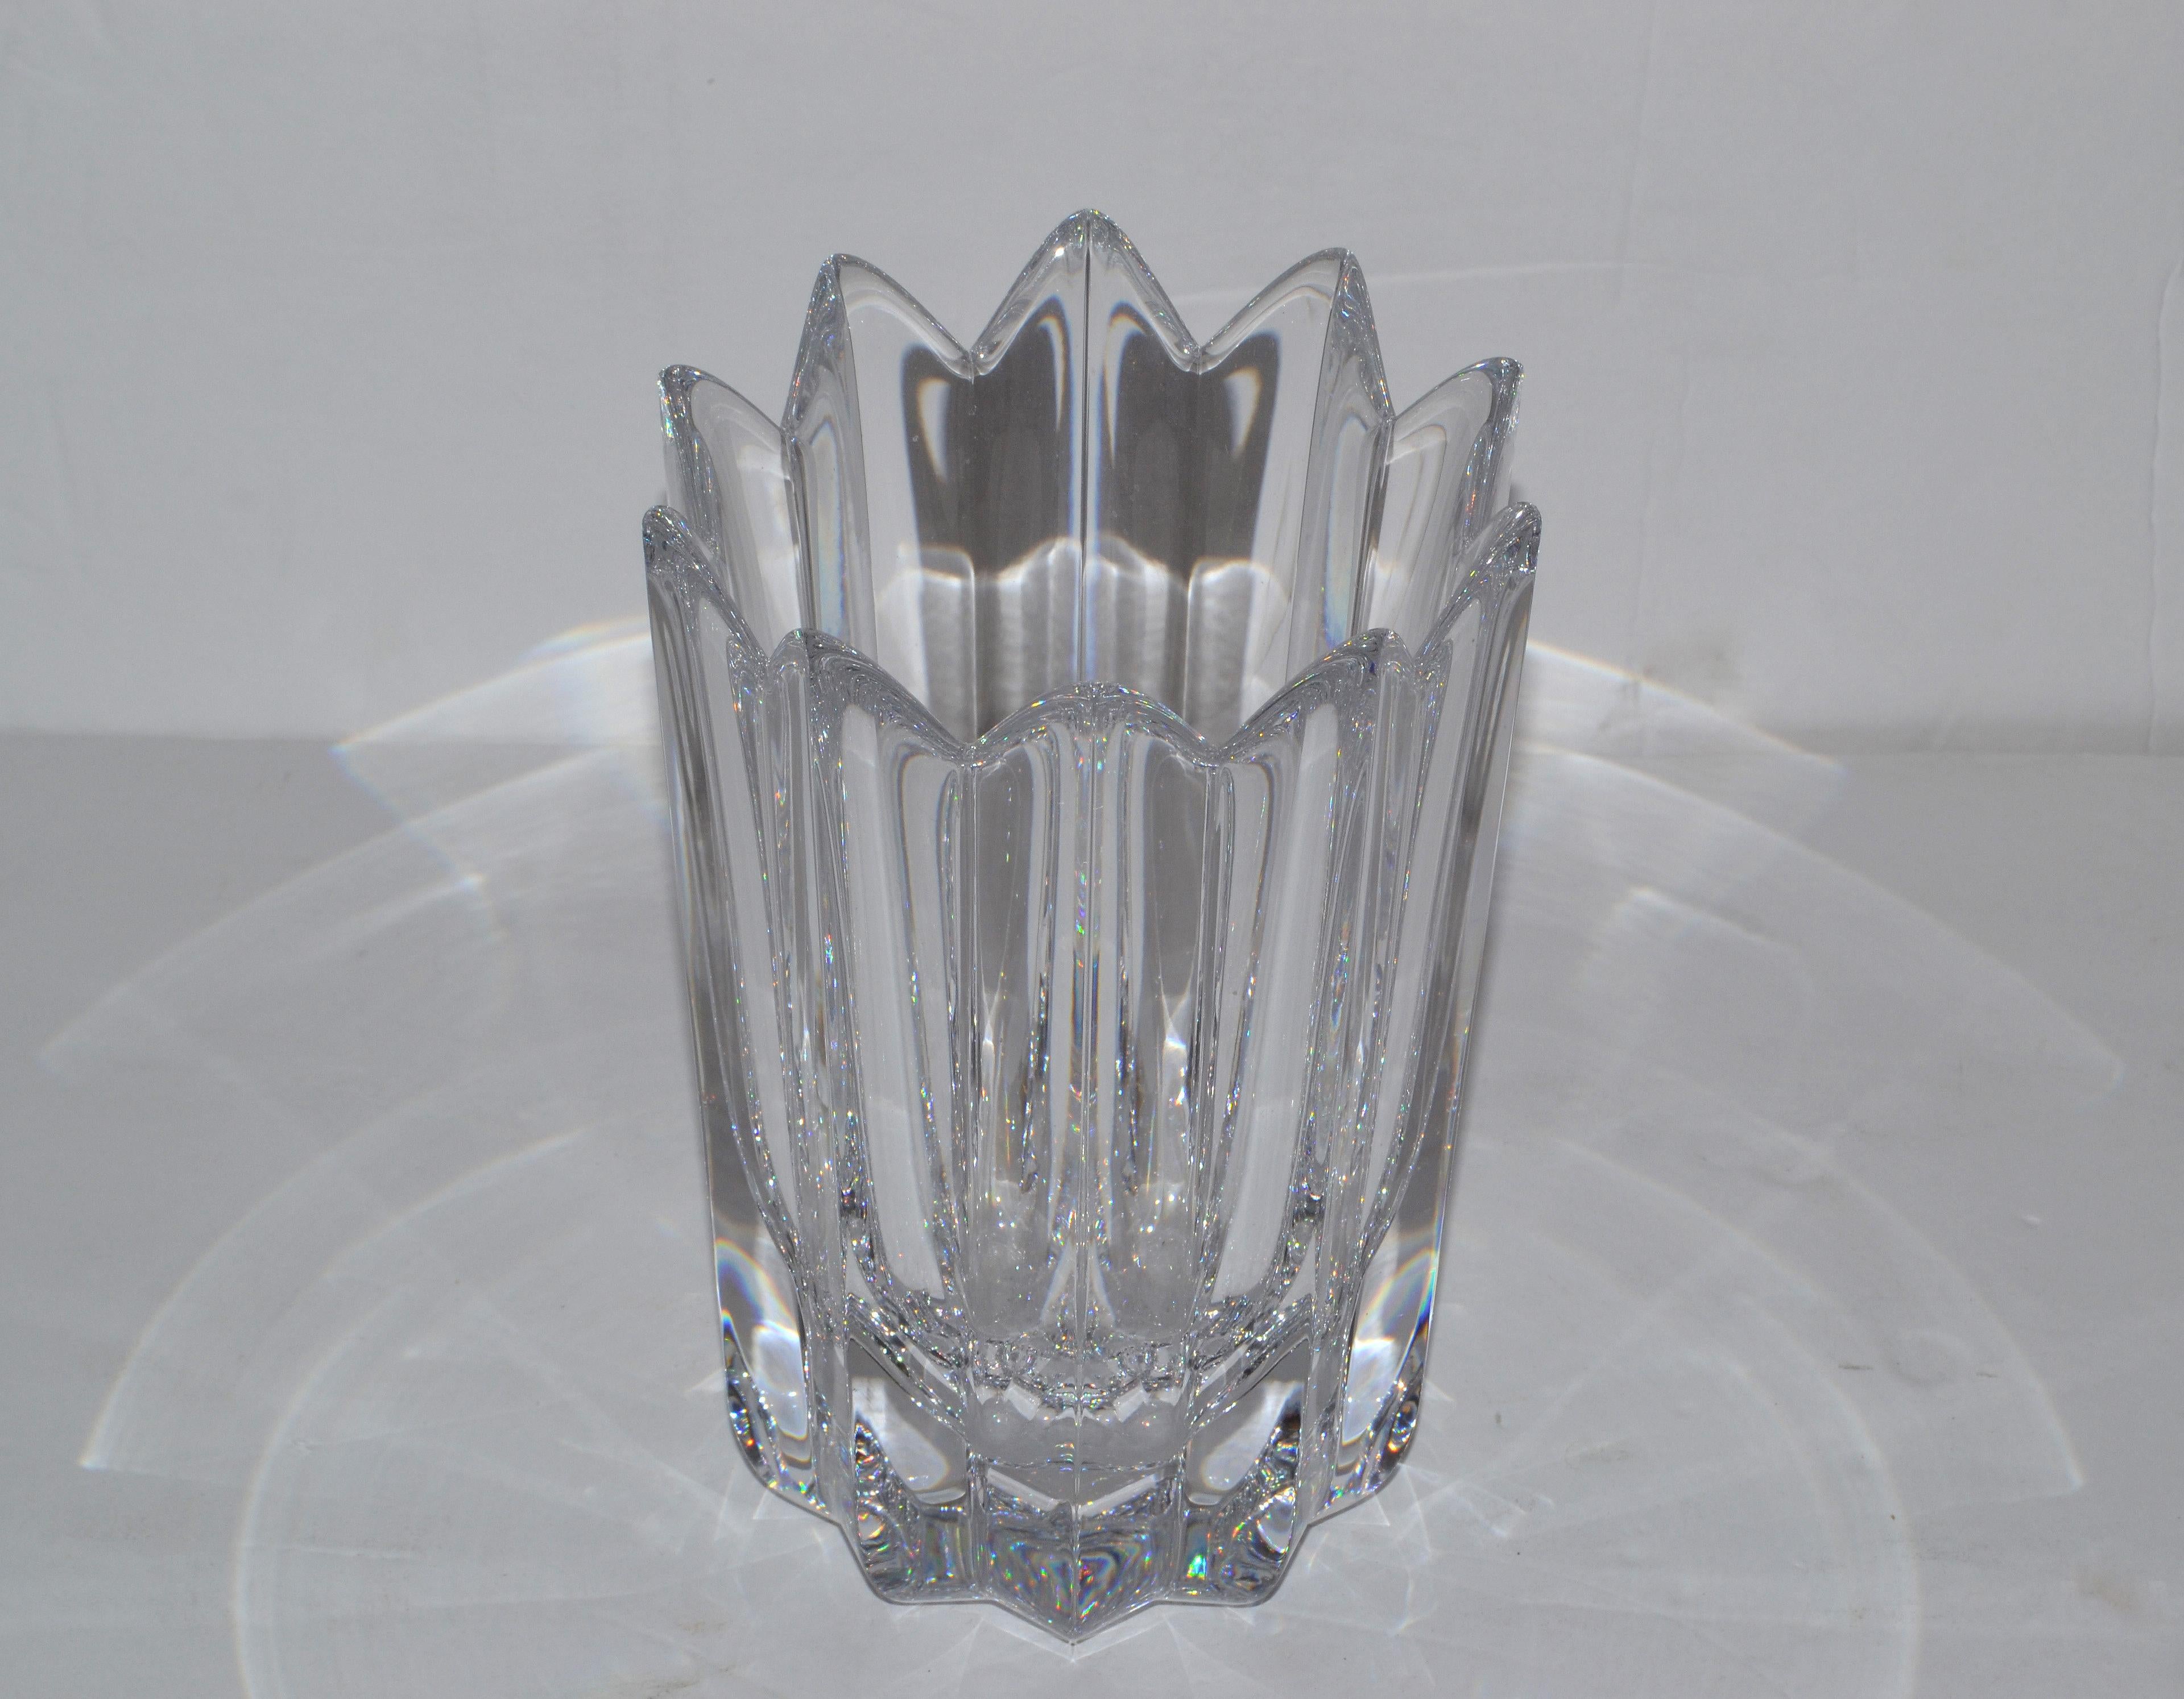 Orrefors Scandinavian Modern lead crystal clear fleur vase Jan Johansson Sweden.
Stunning fleur pattern tulip vase made in Sweden, signed and numbered underneath.
The vase is heavy and 5 inches wide at the top.